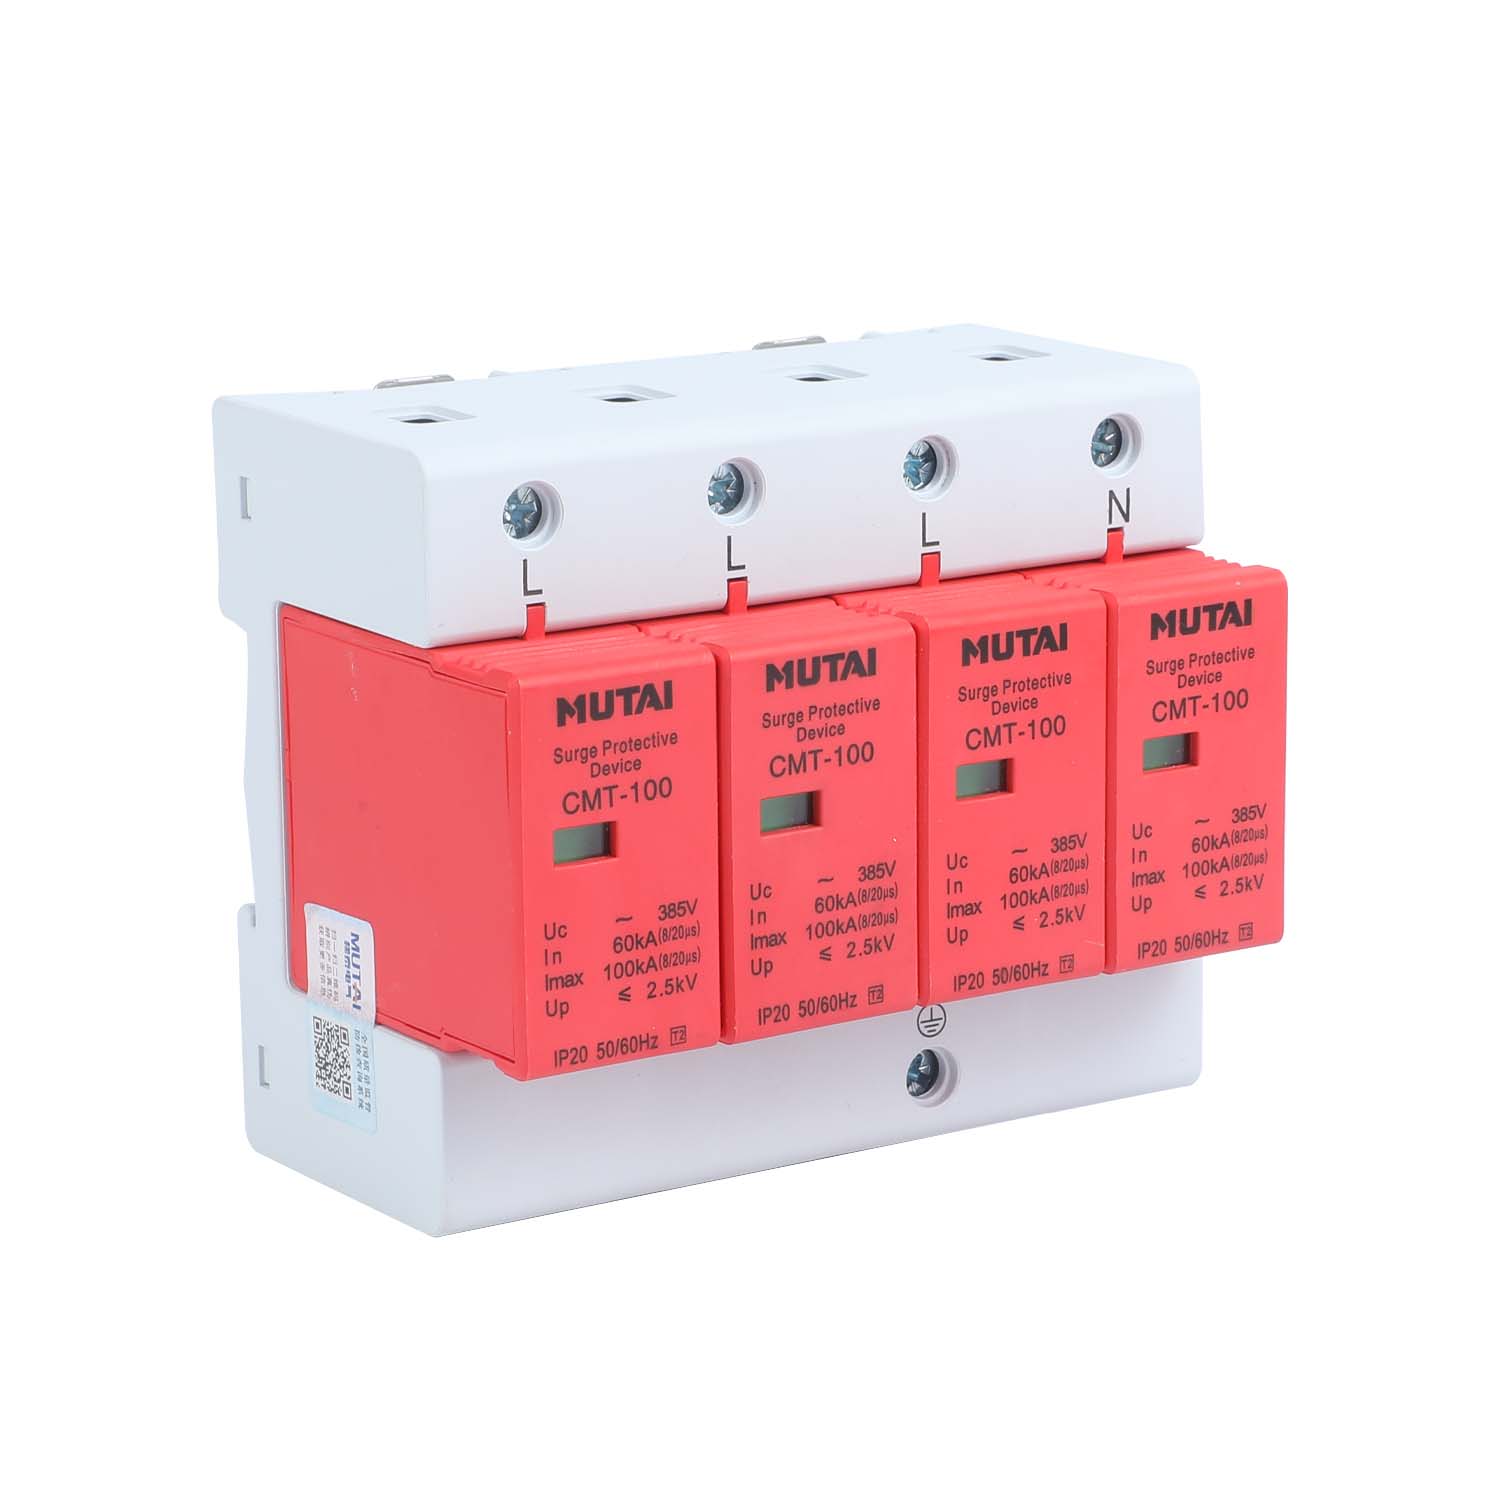 What is a surge protection device(SPD)